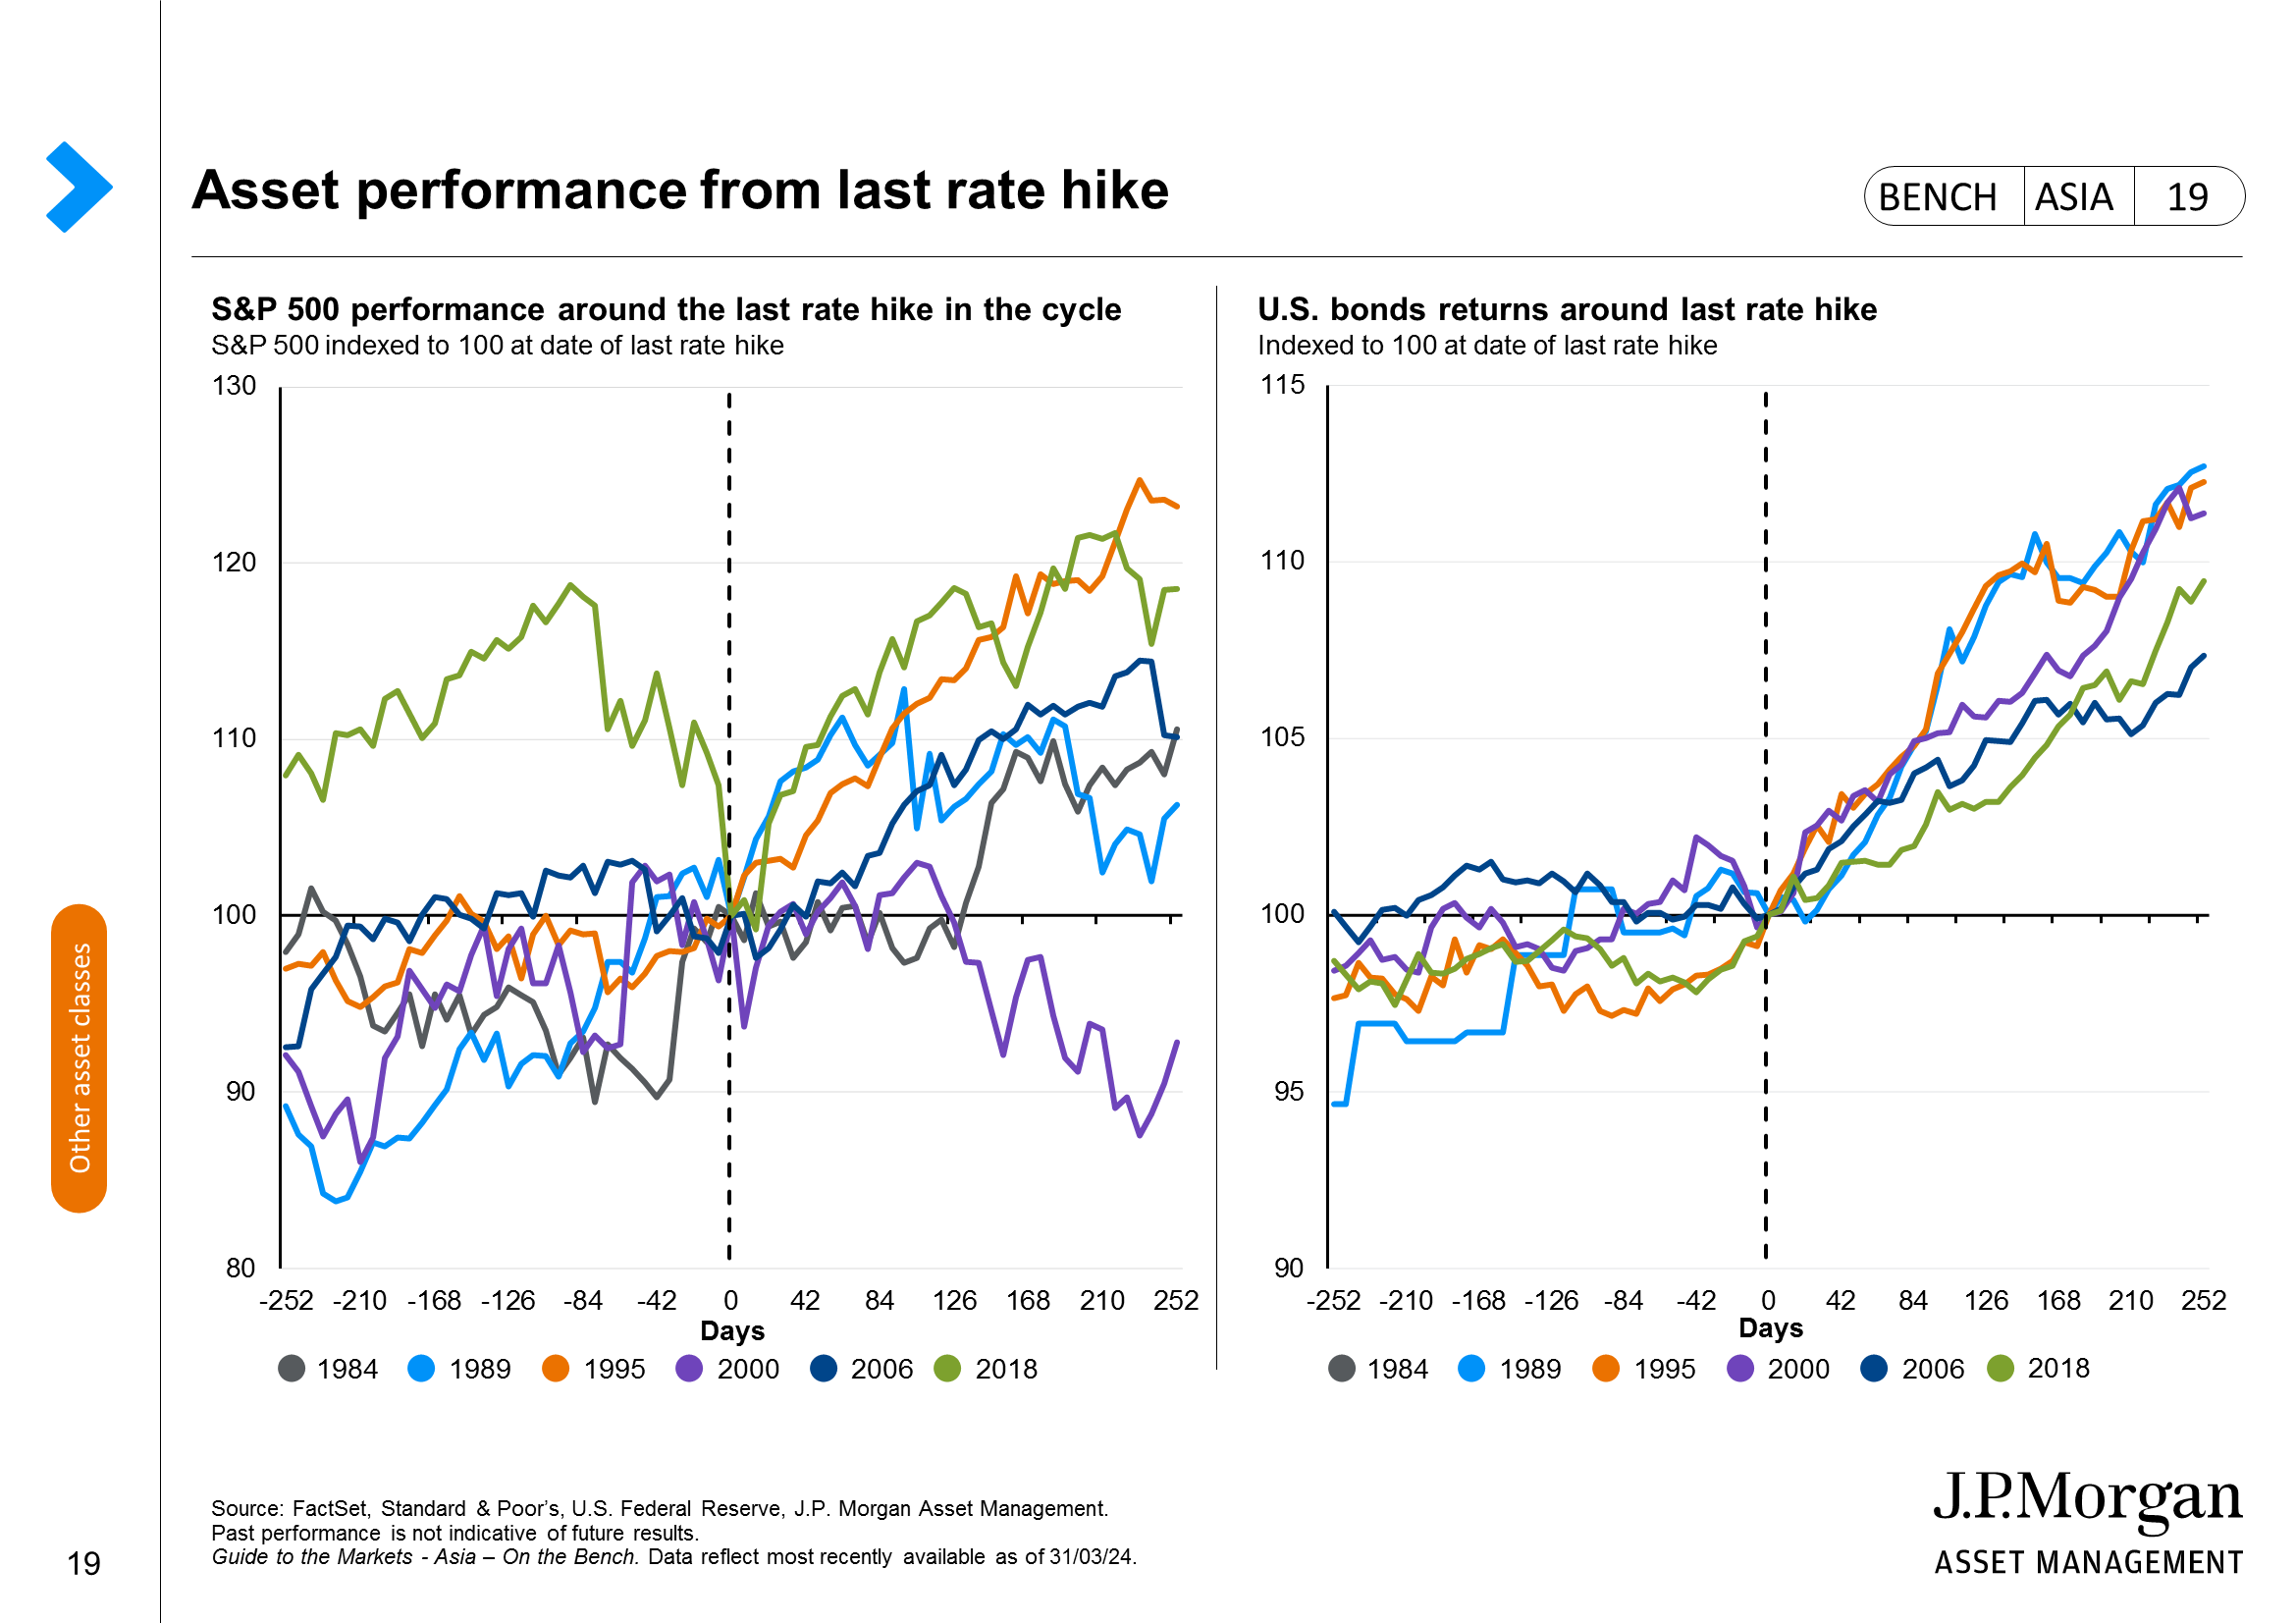 Emerging market equities: Performance drivers